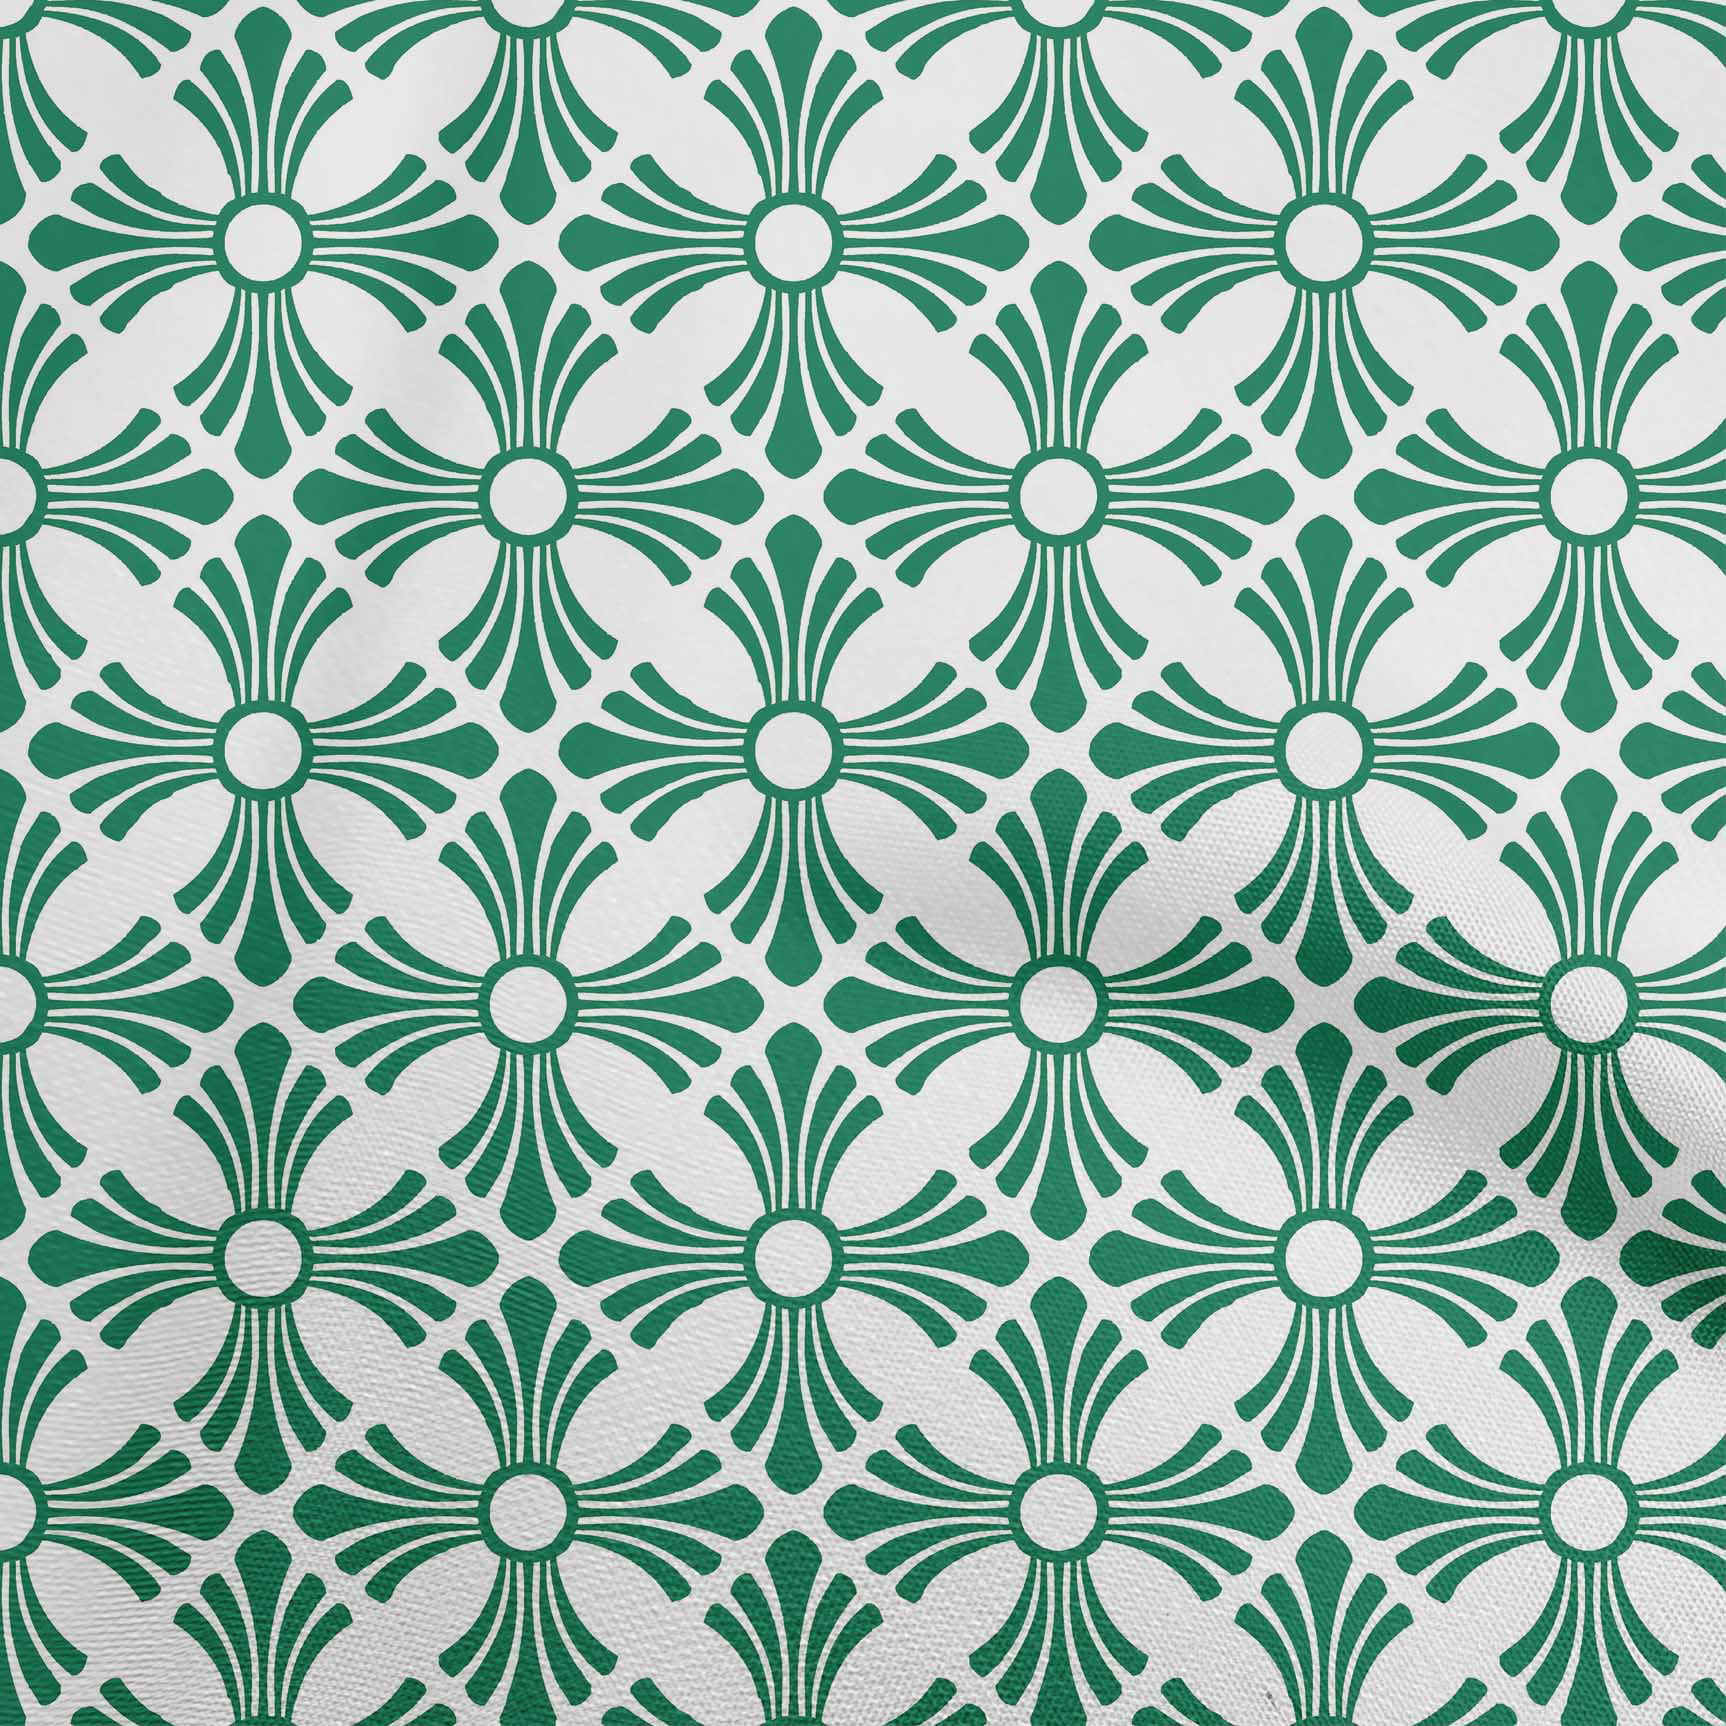  oneOone Cotton Cambric Olive Green Fabric Leaves DIY Clothing  Quilting Fabric Print Fabric by Yard 56 Inch Wide-LV : Everything Else